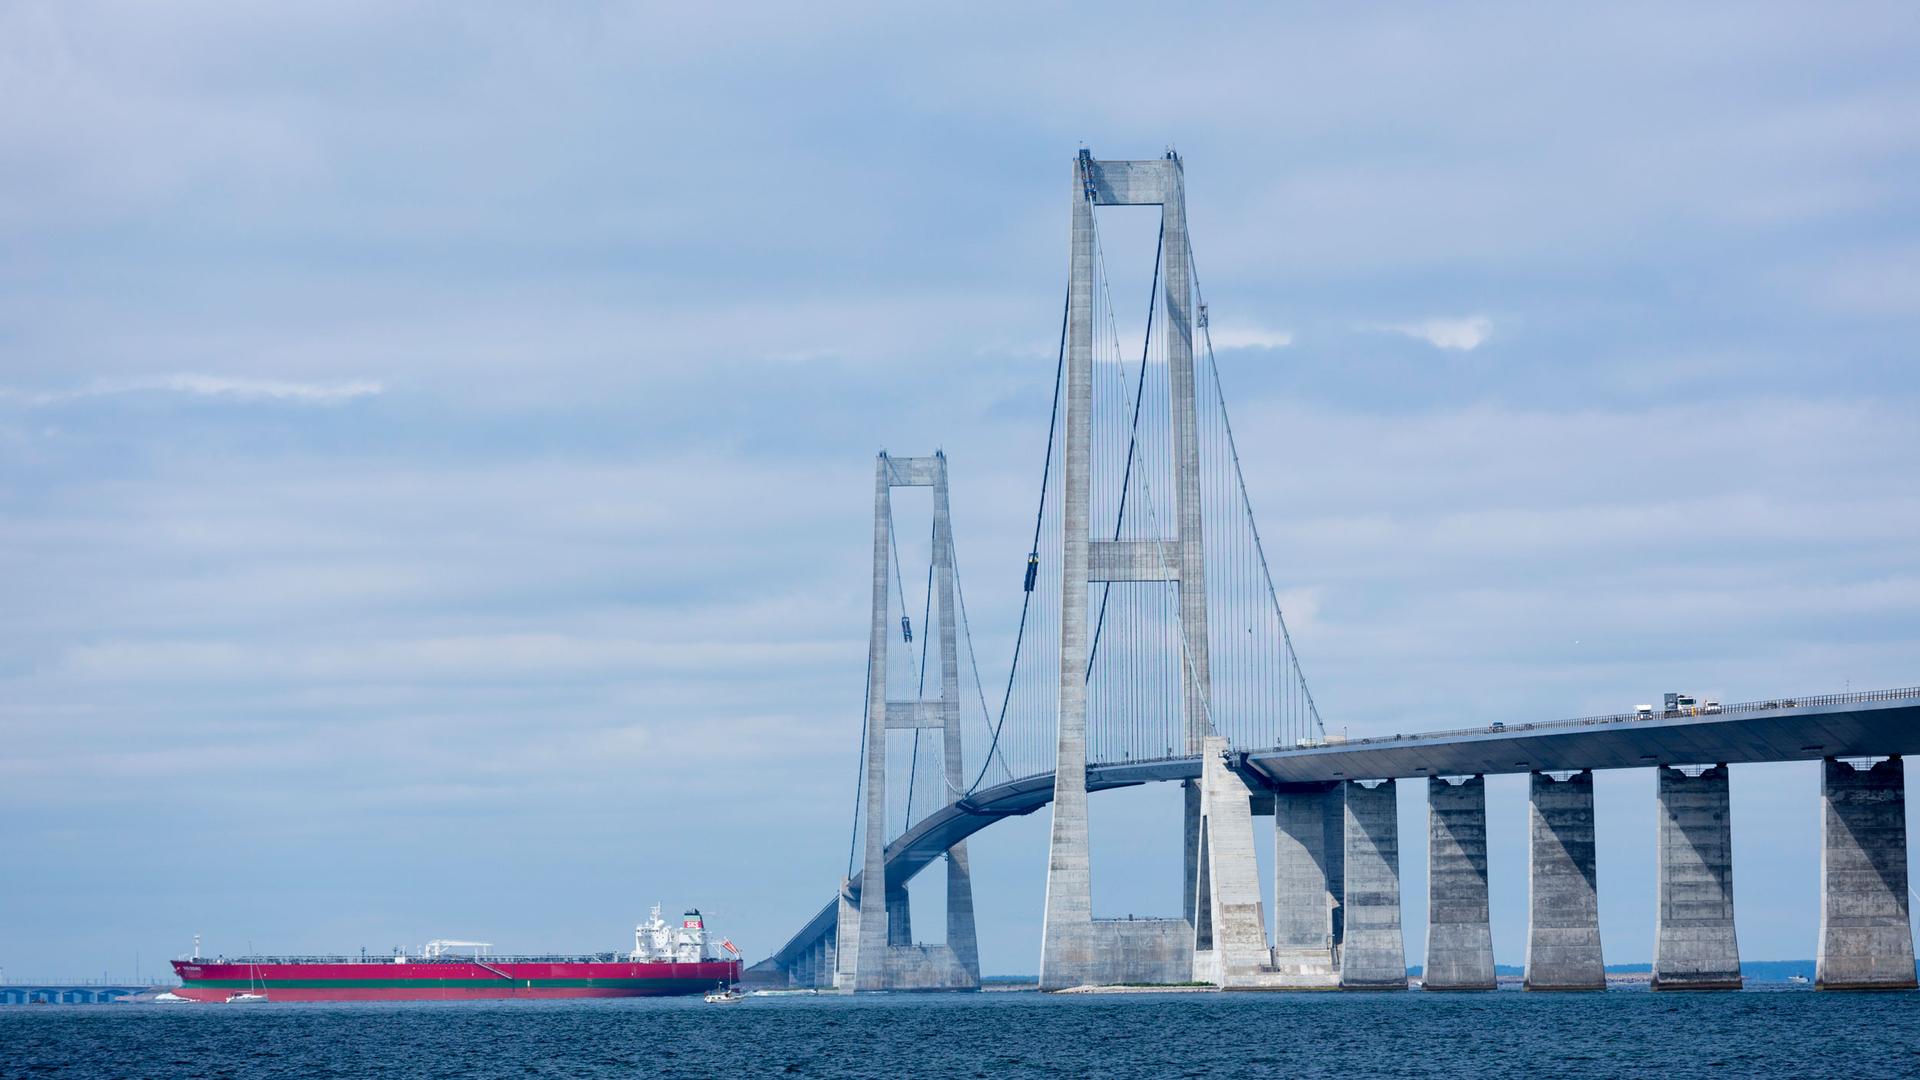 A large red oil tanker is shown in the distance passing underneath two tall bridge columns.